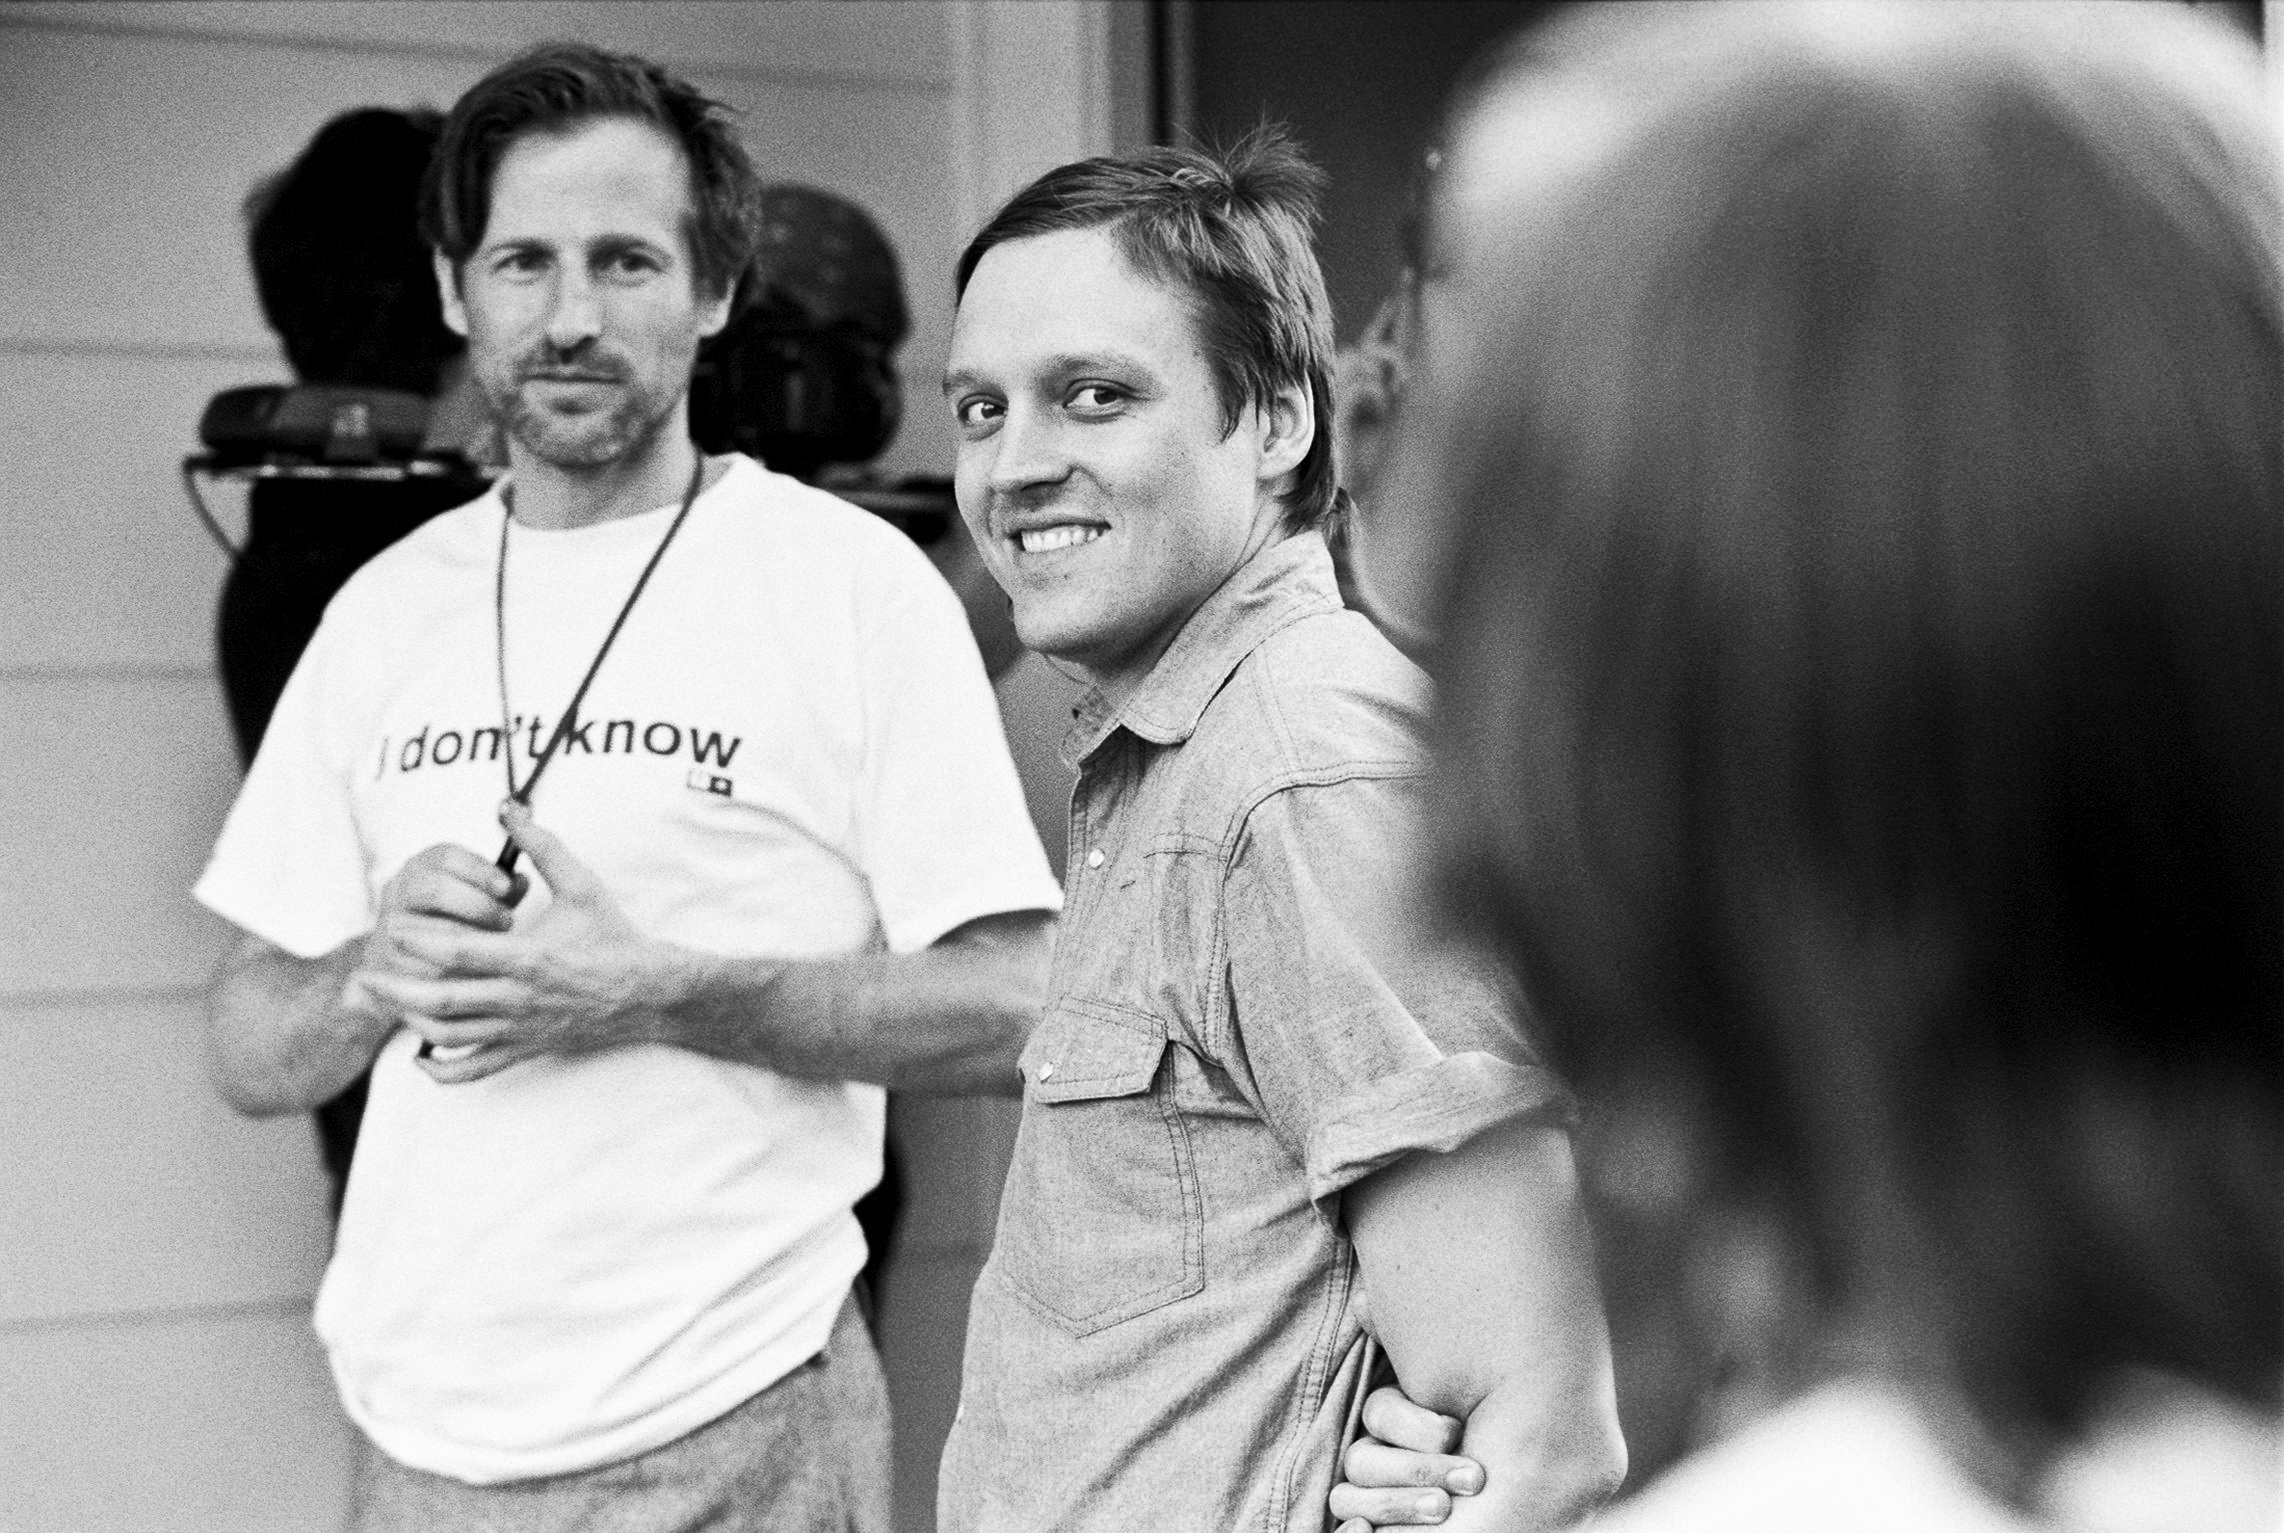  Behind the scenes of "Scenes From the Suburbs," by Spike Jonze and Arcade Fire, Austin, Texas, April, 2010. 